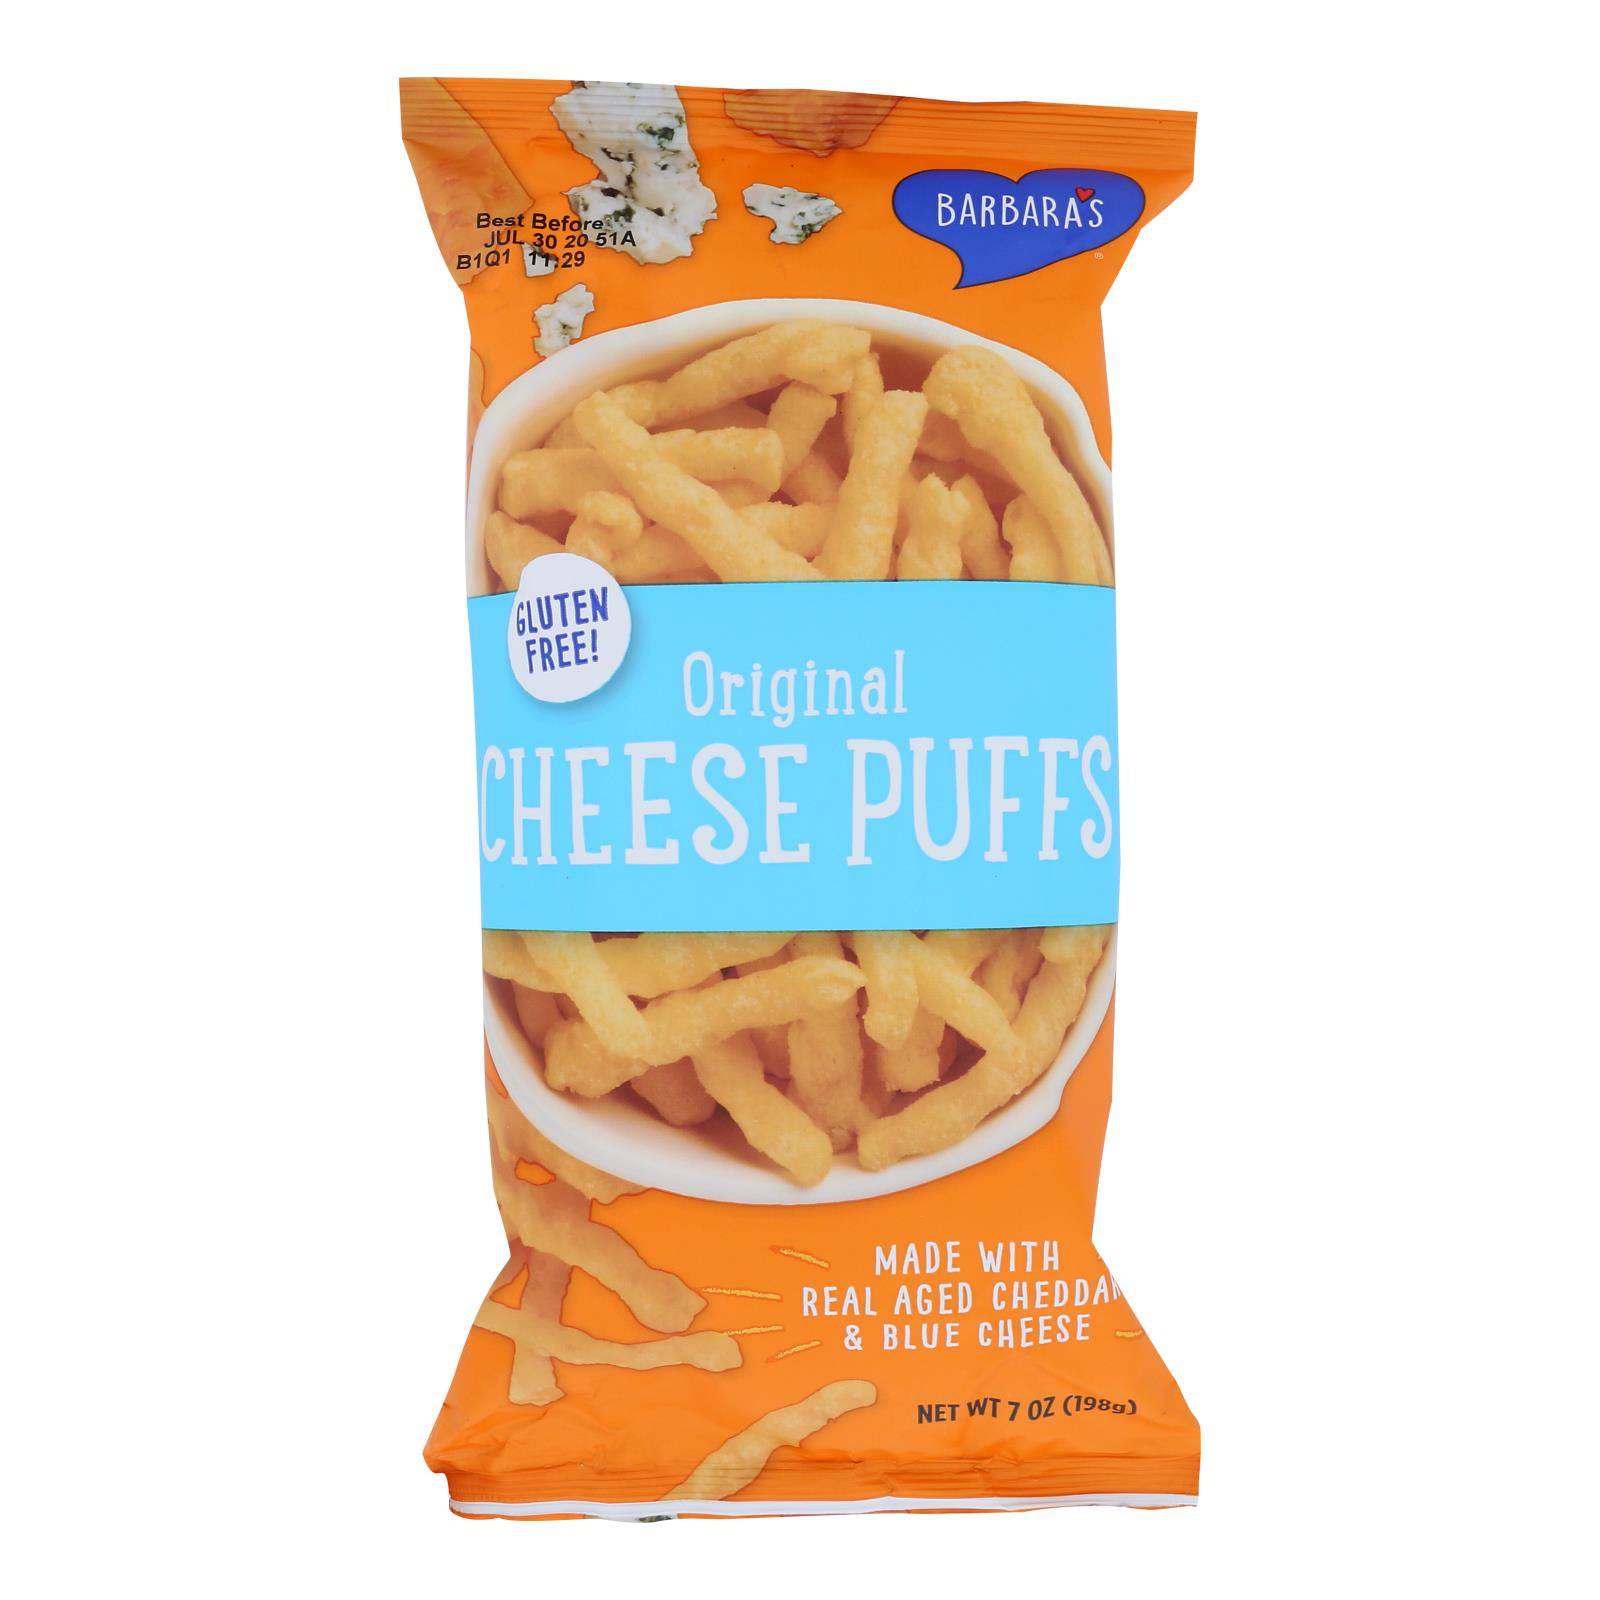 Buy Barbara's Bakery - Baked Cheese Puffs - Original - Case Of 12 - 7 Oz.  at OnlyNaturals.us